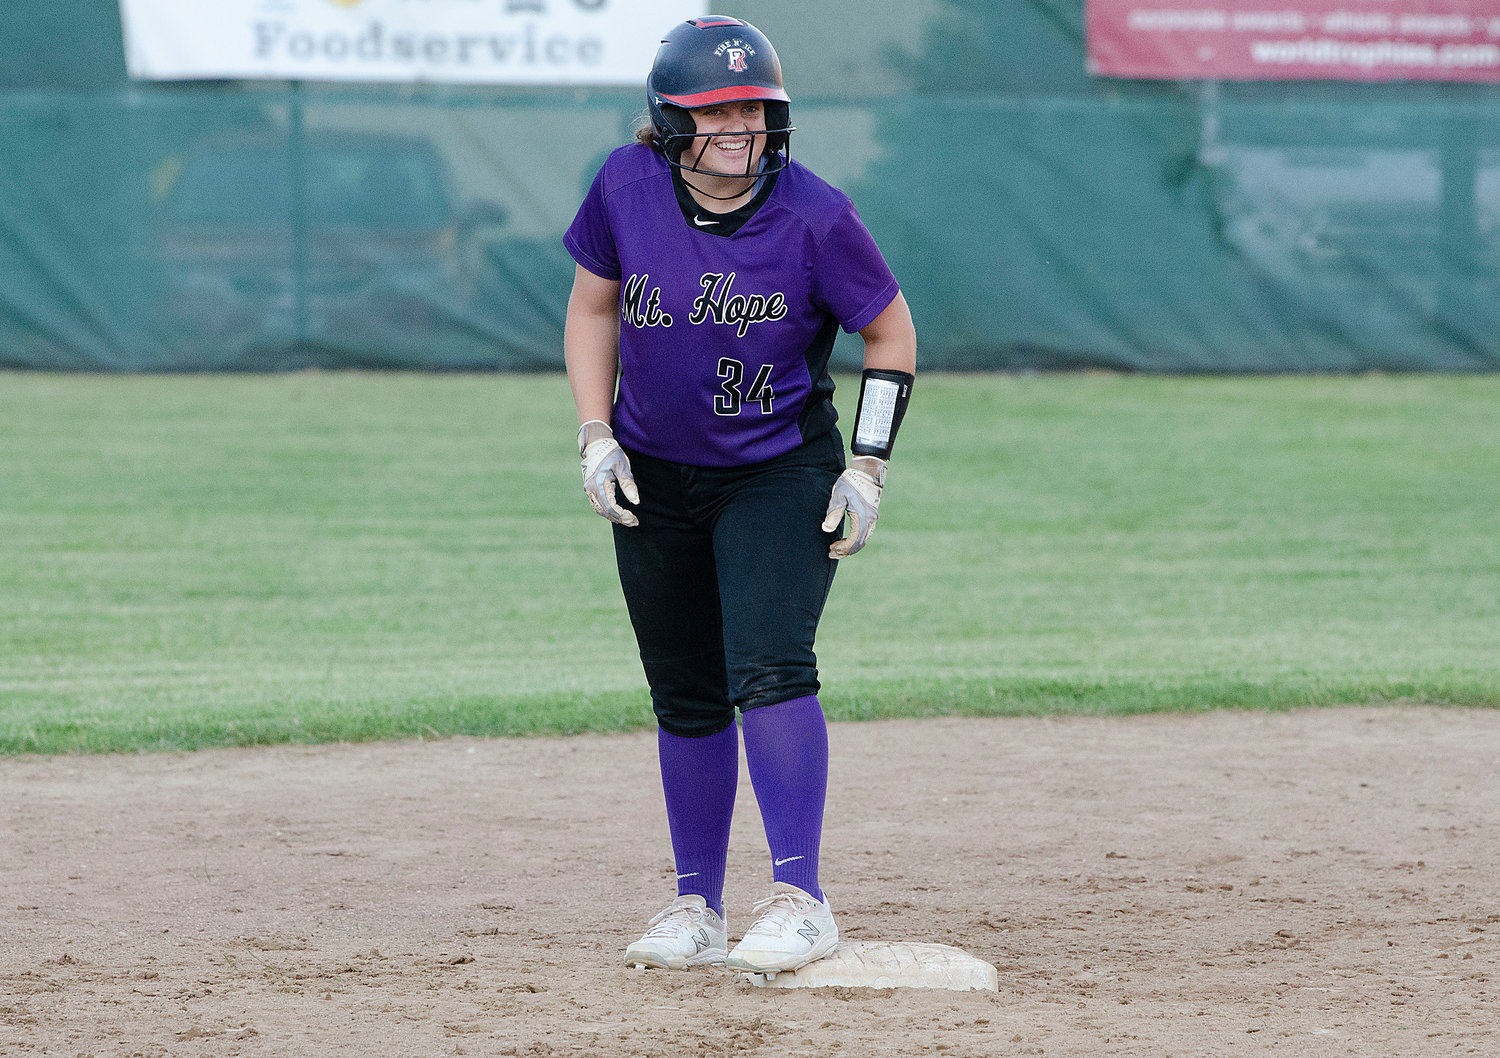 Grace Stephenson stands on second base and looks towards her screaming teammates in the dug out, after smacking a run scoring, double in the first inning.